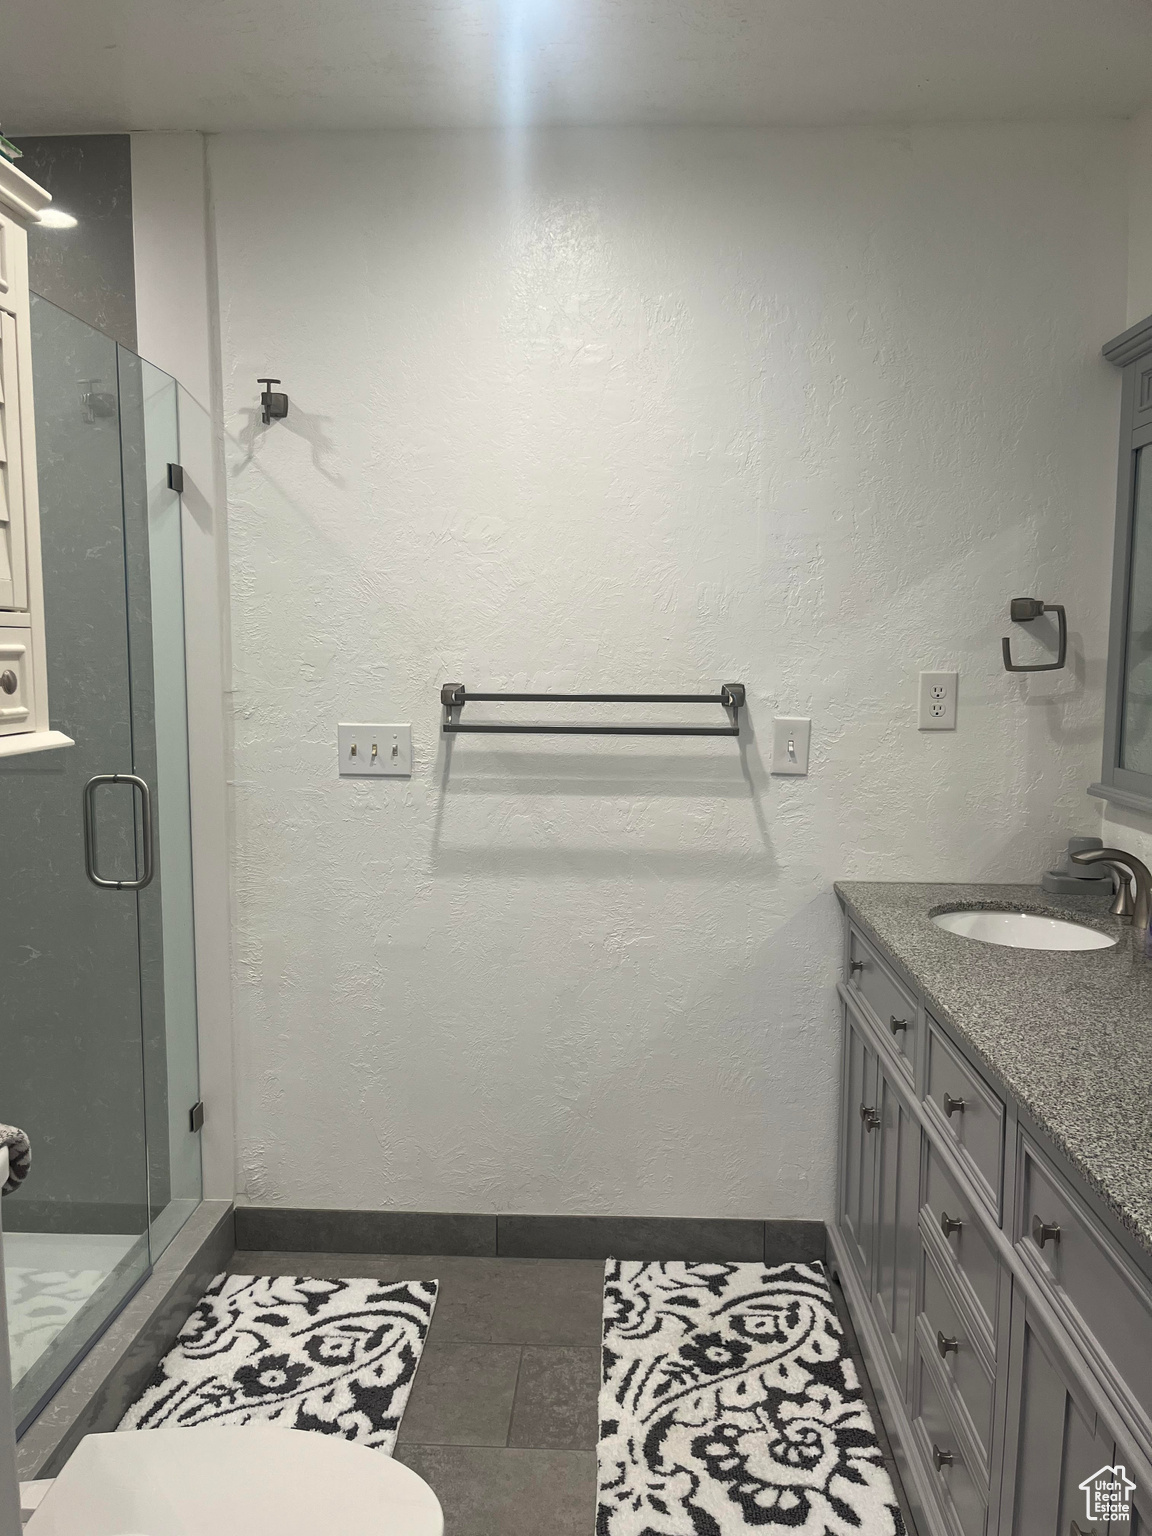 Bathroom featuring vanity with double sinks, a shower with shower door, and tile floors